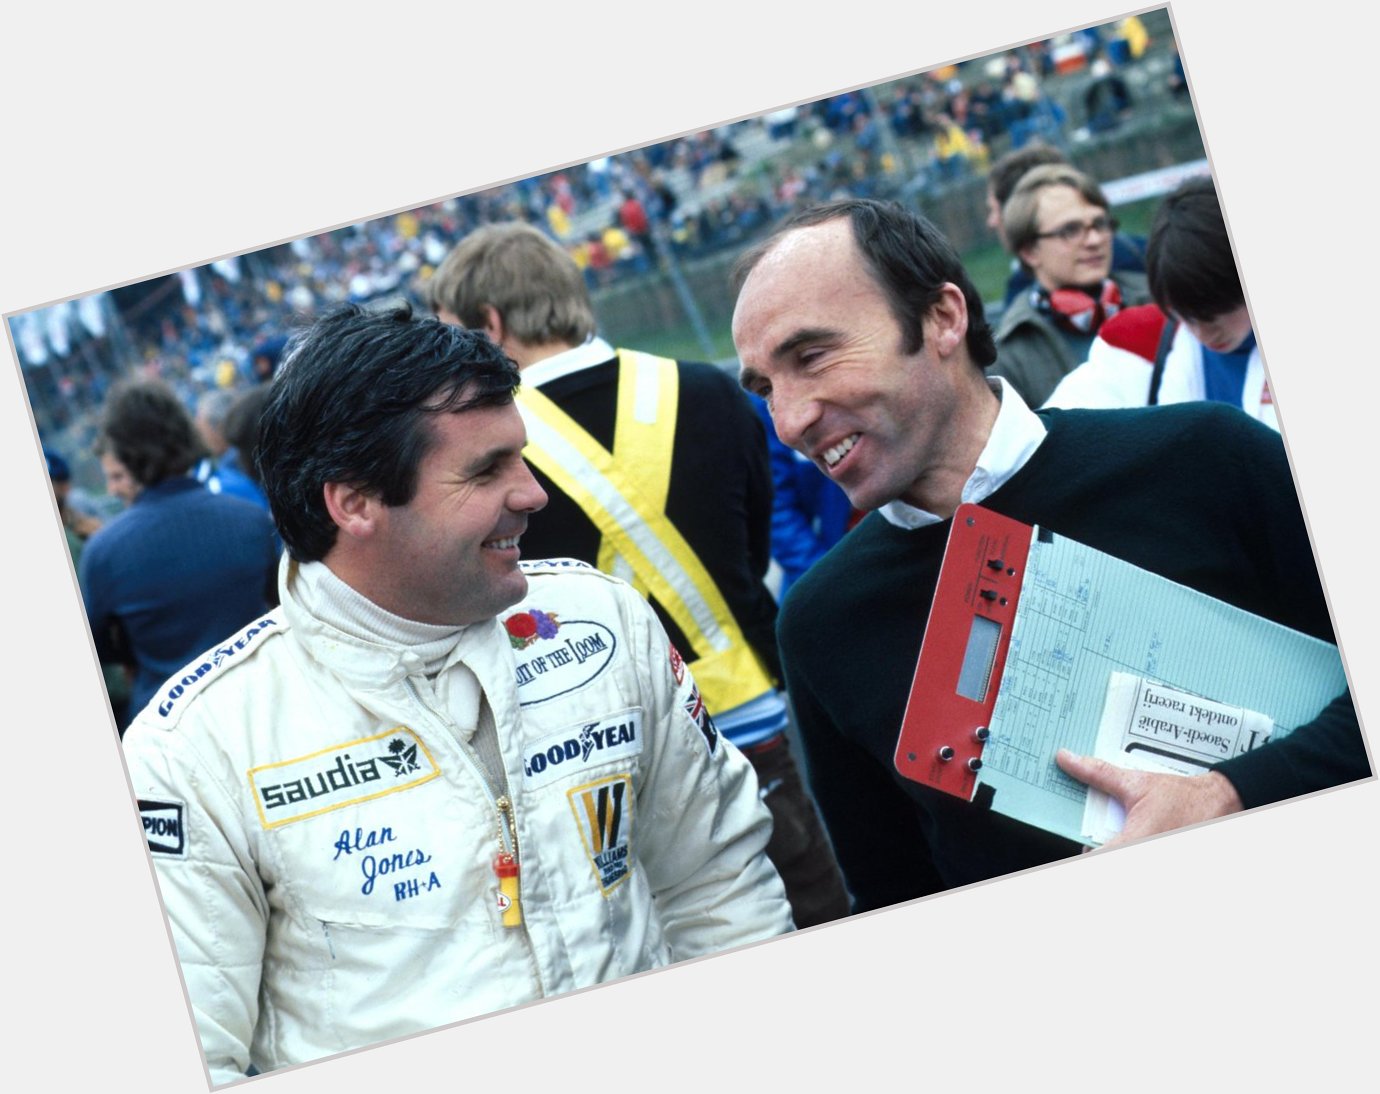 Happy birthday to our first every World Champ Alan Jones. Many happy returns Alan from all at Williams. 